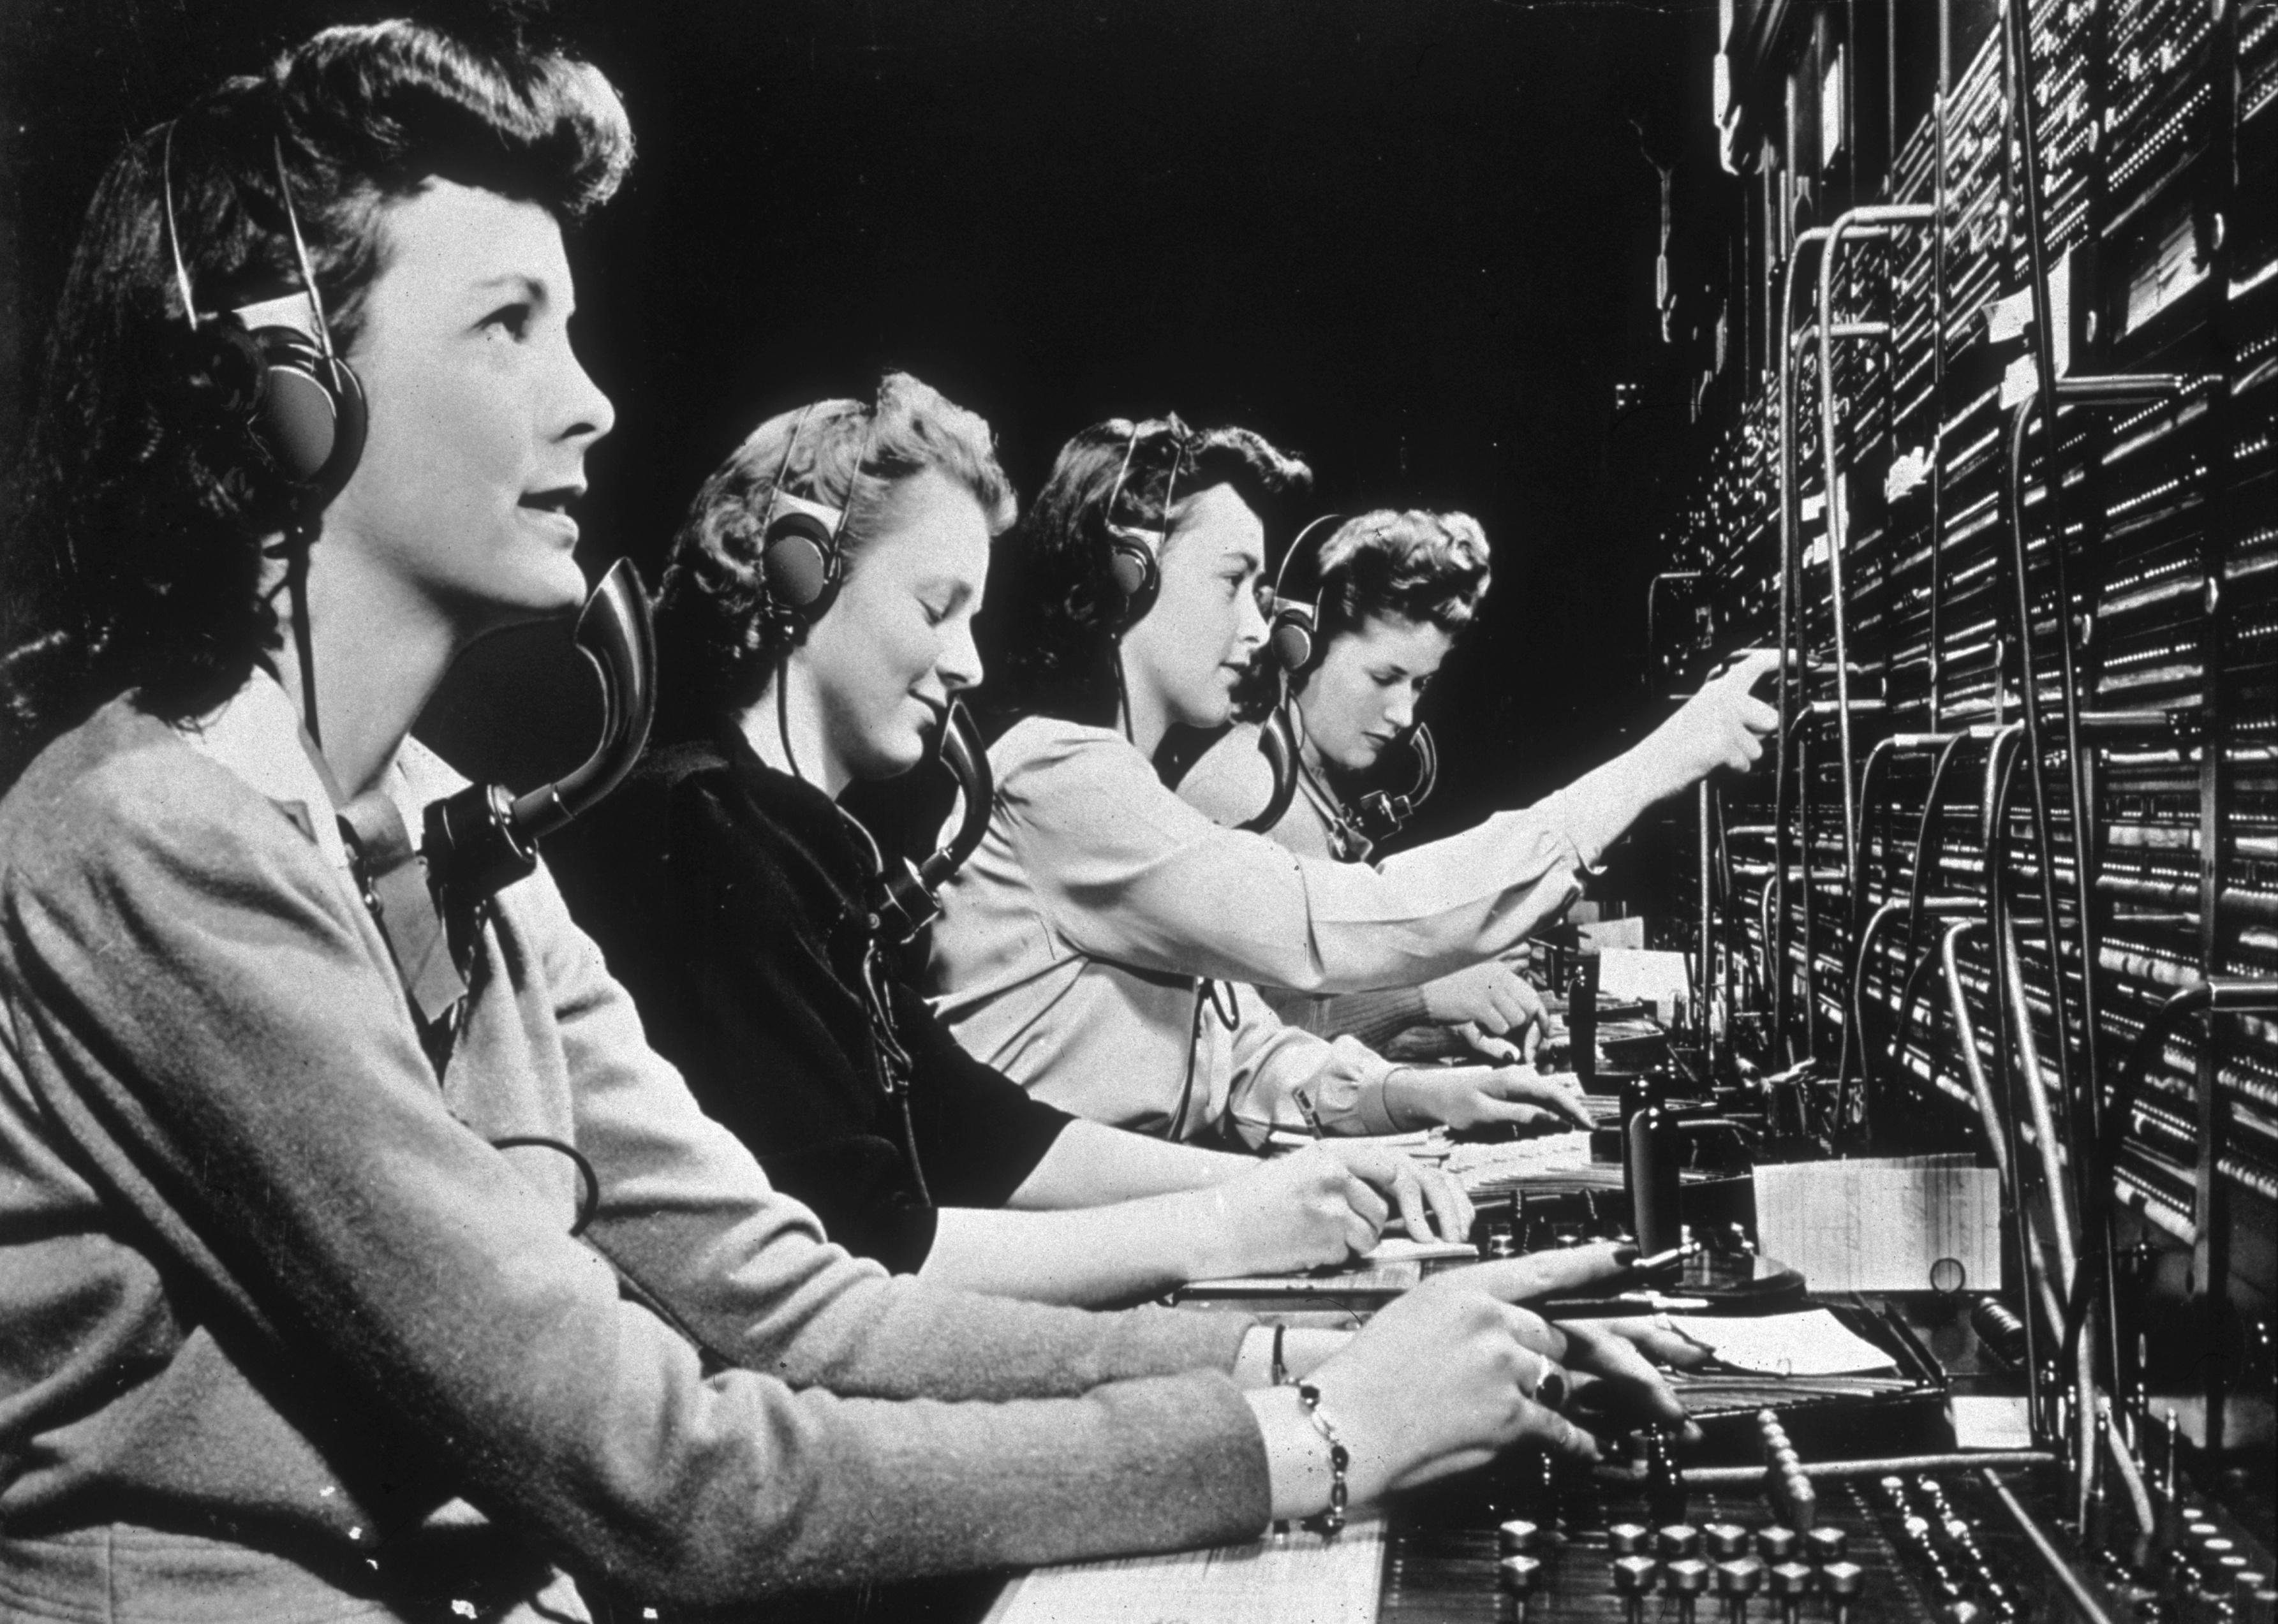 Four operators connect calls while working at a switchboard